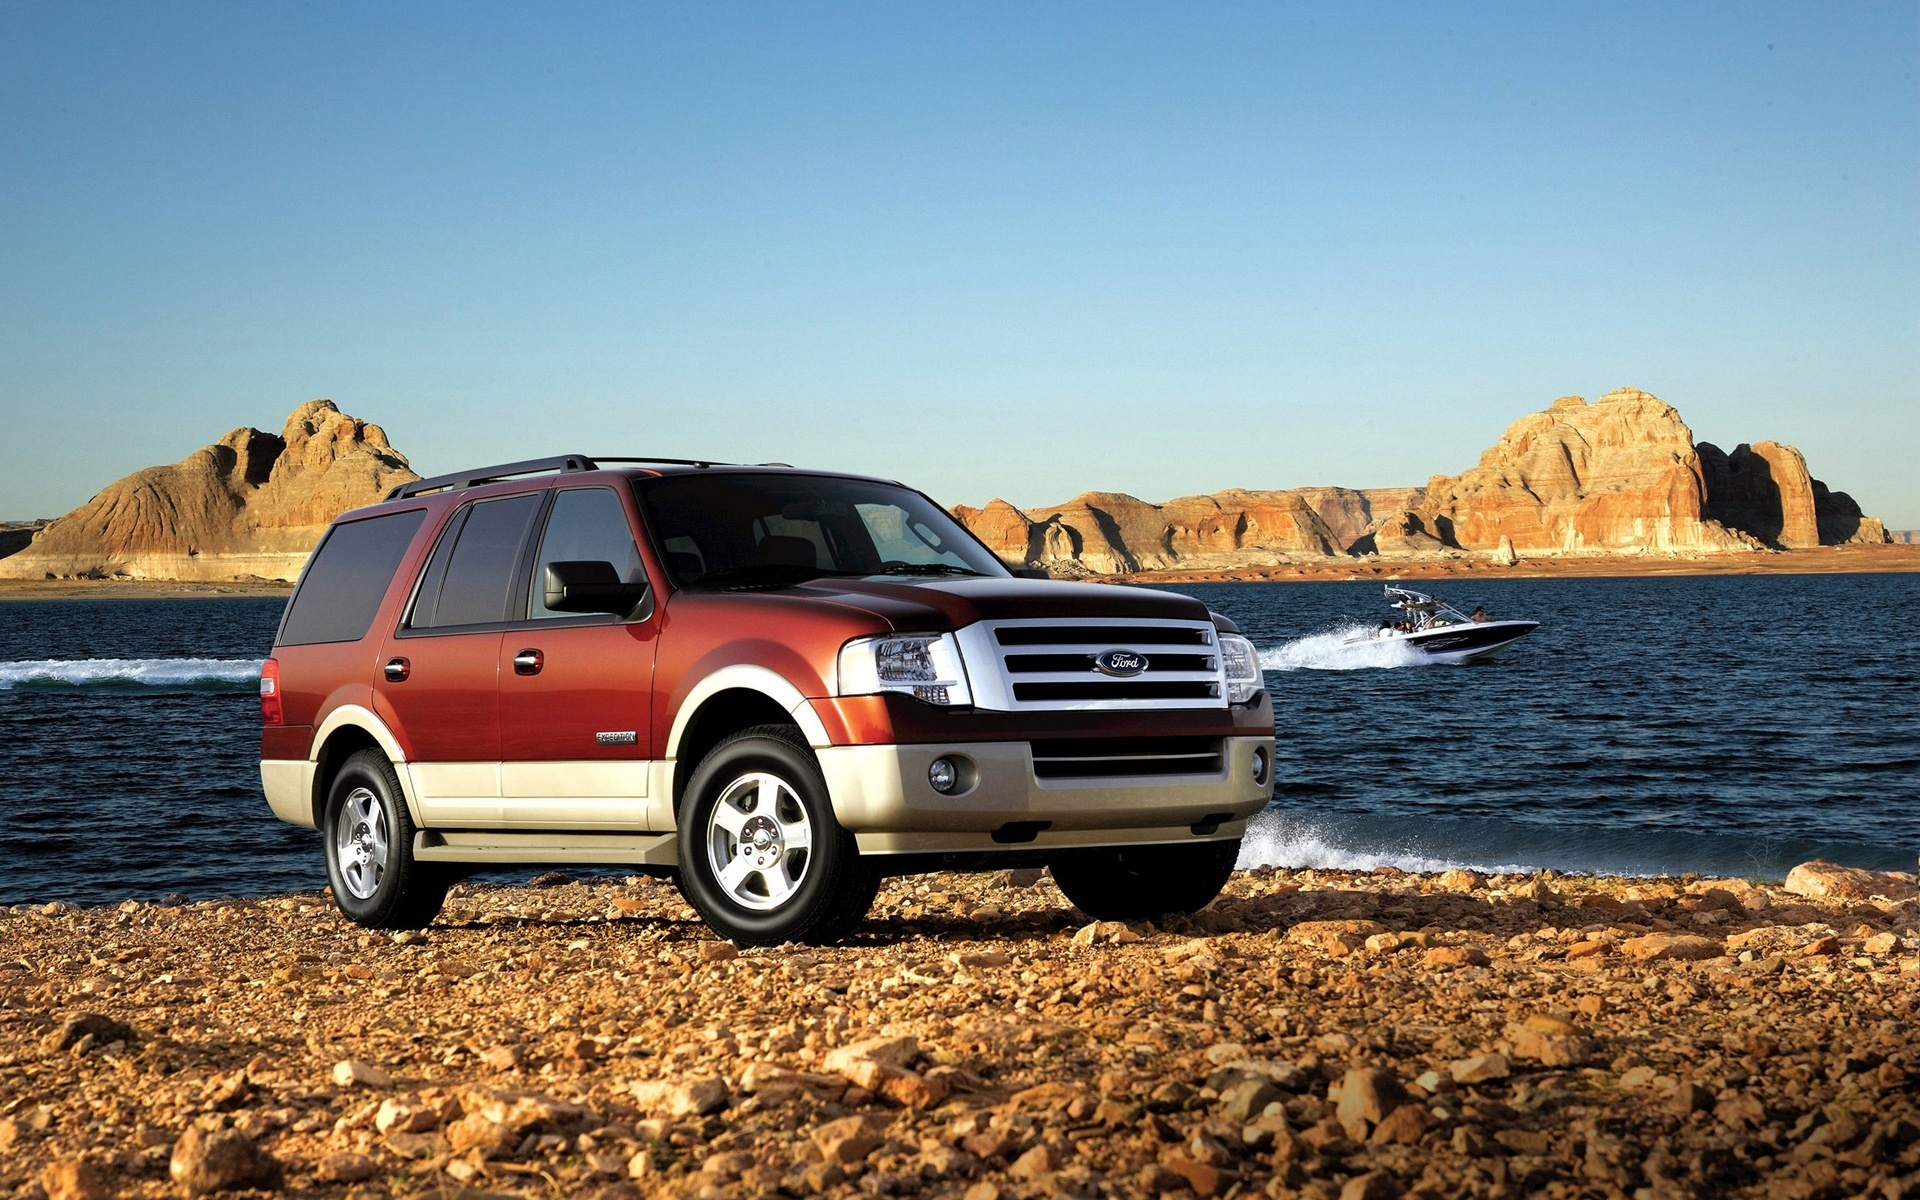 2010 Ford Expedition for 1920 x 1200 widescreen resolution